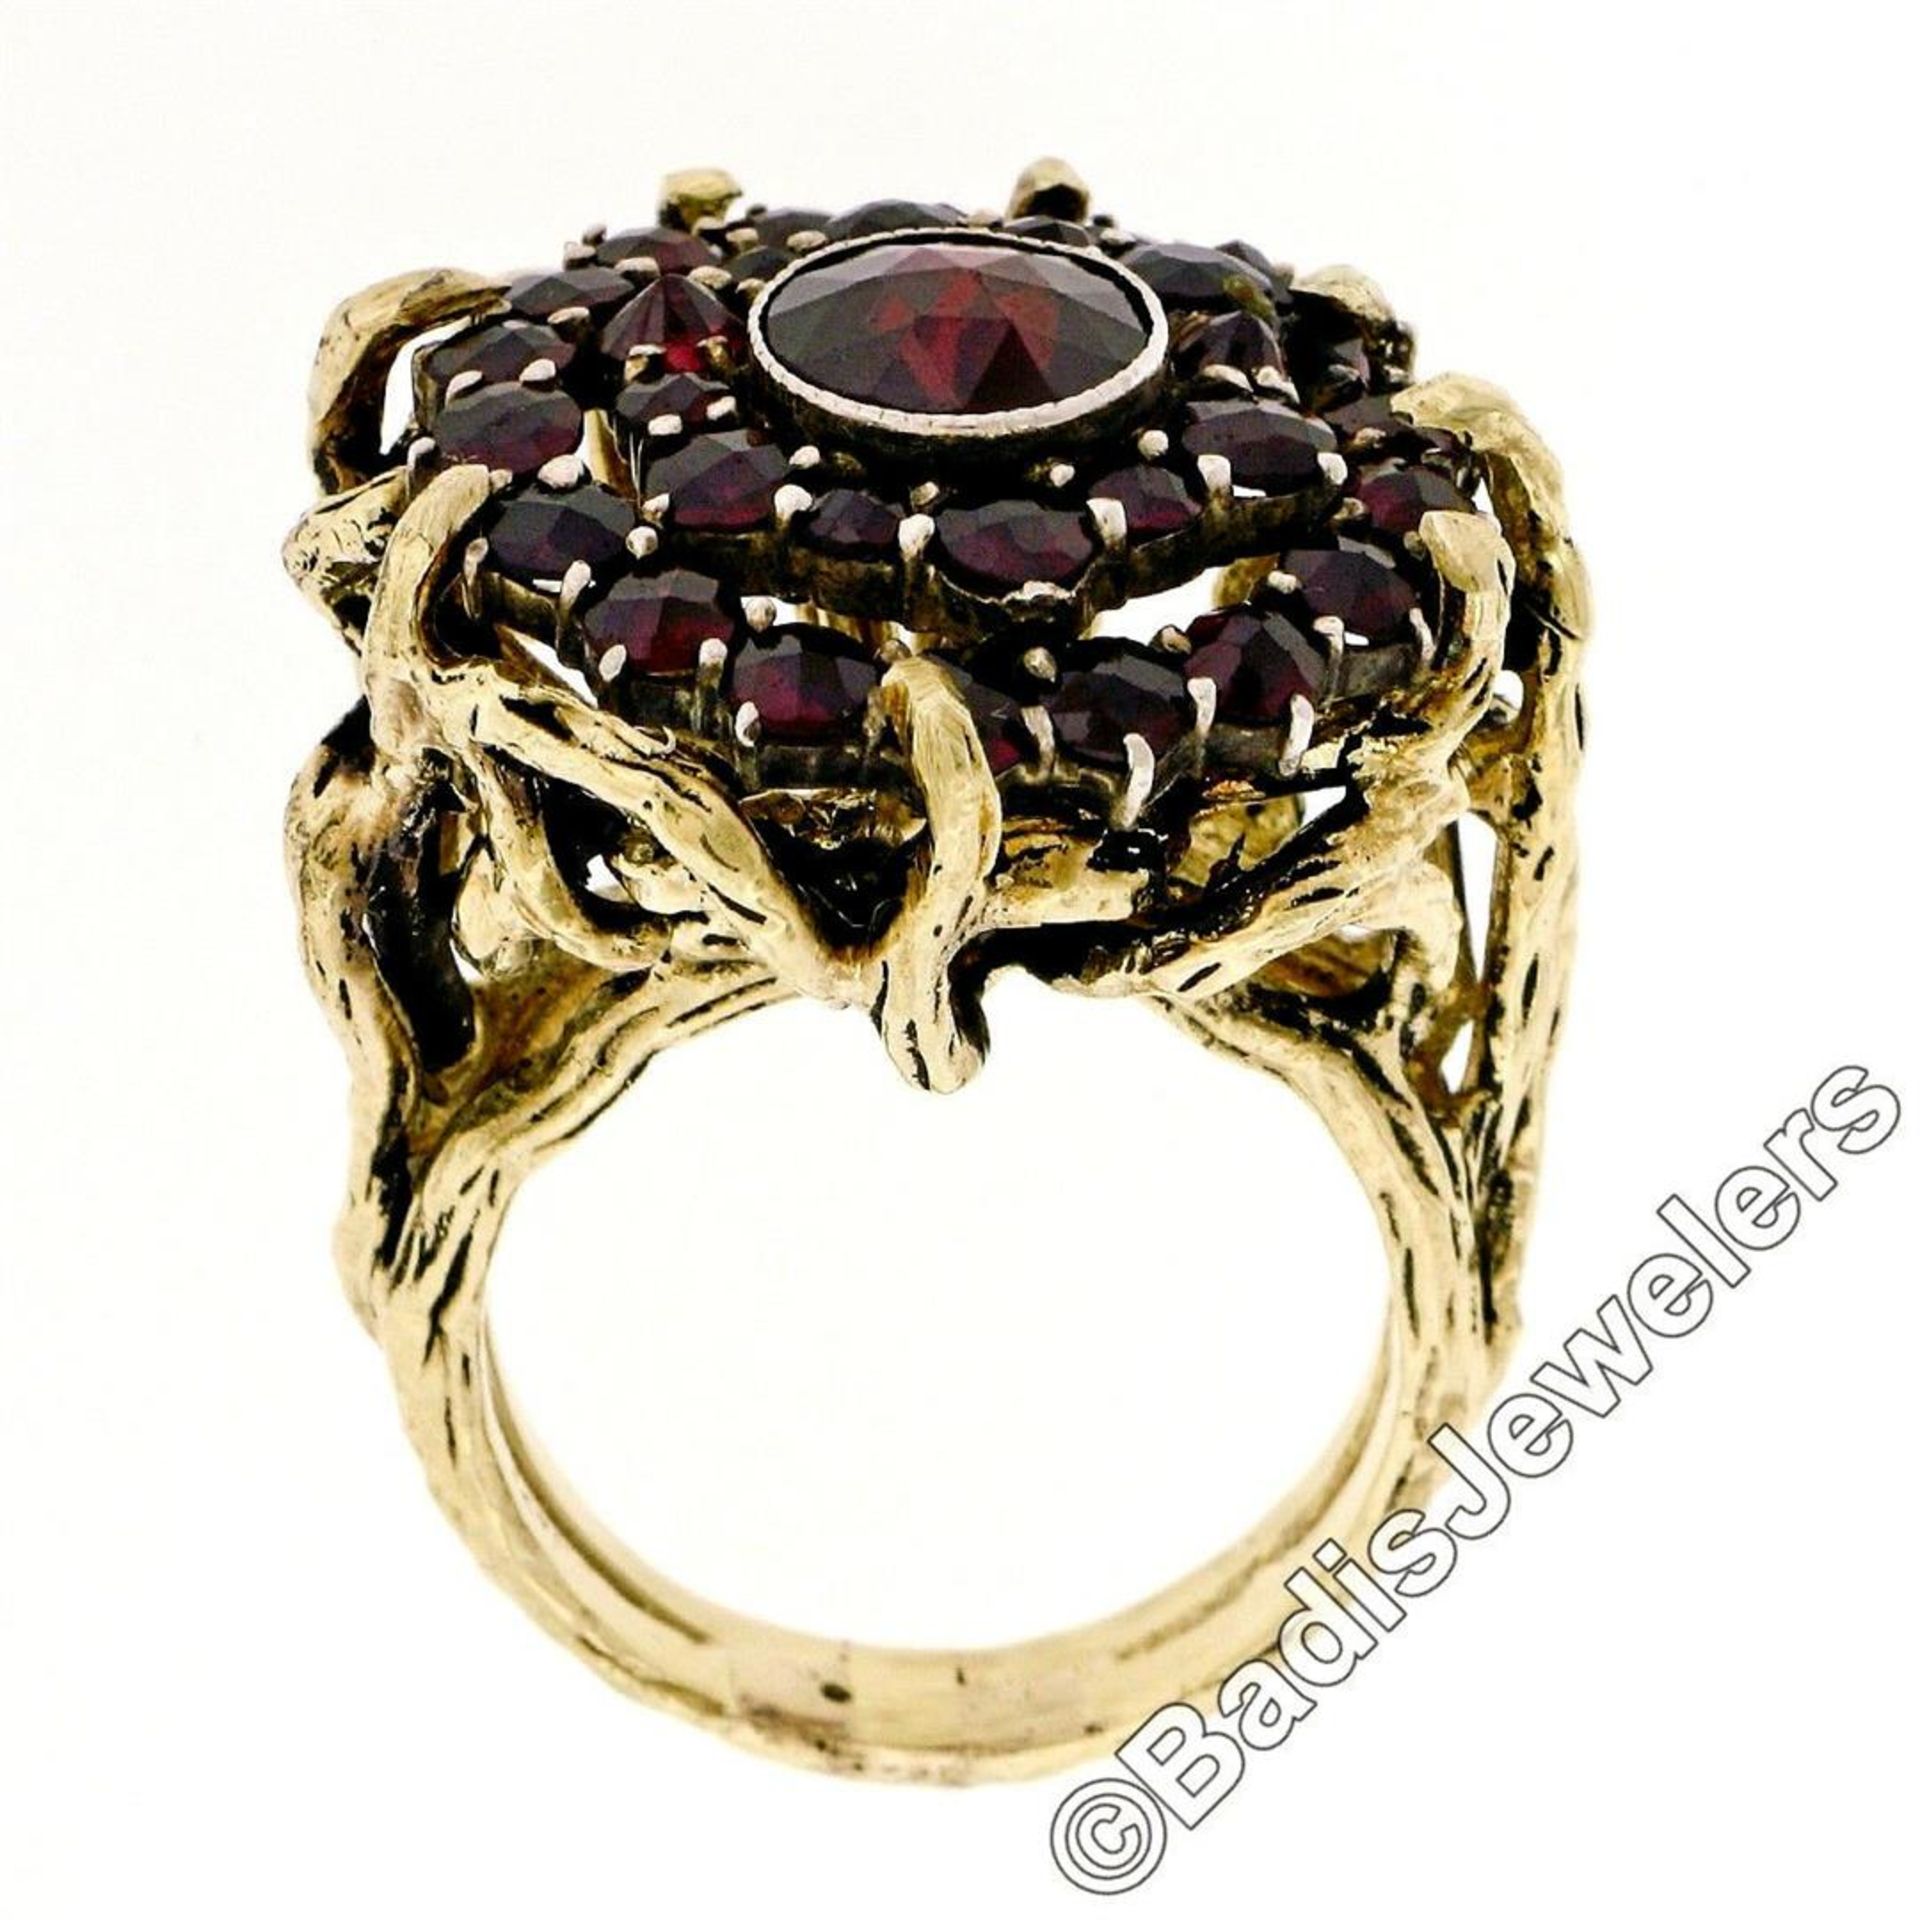 Vintage 14kt Yellow Gold and Silver Top Old Cut Garnet Cluster Ring - Image 5 of 9